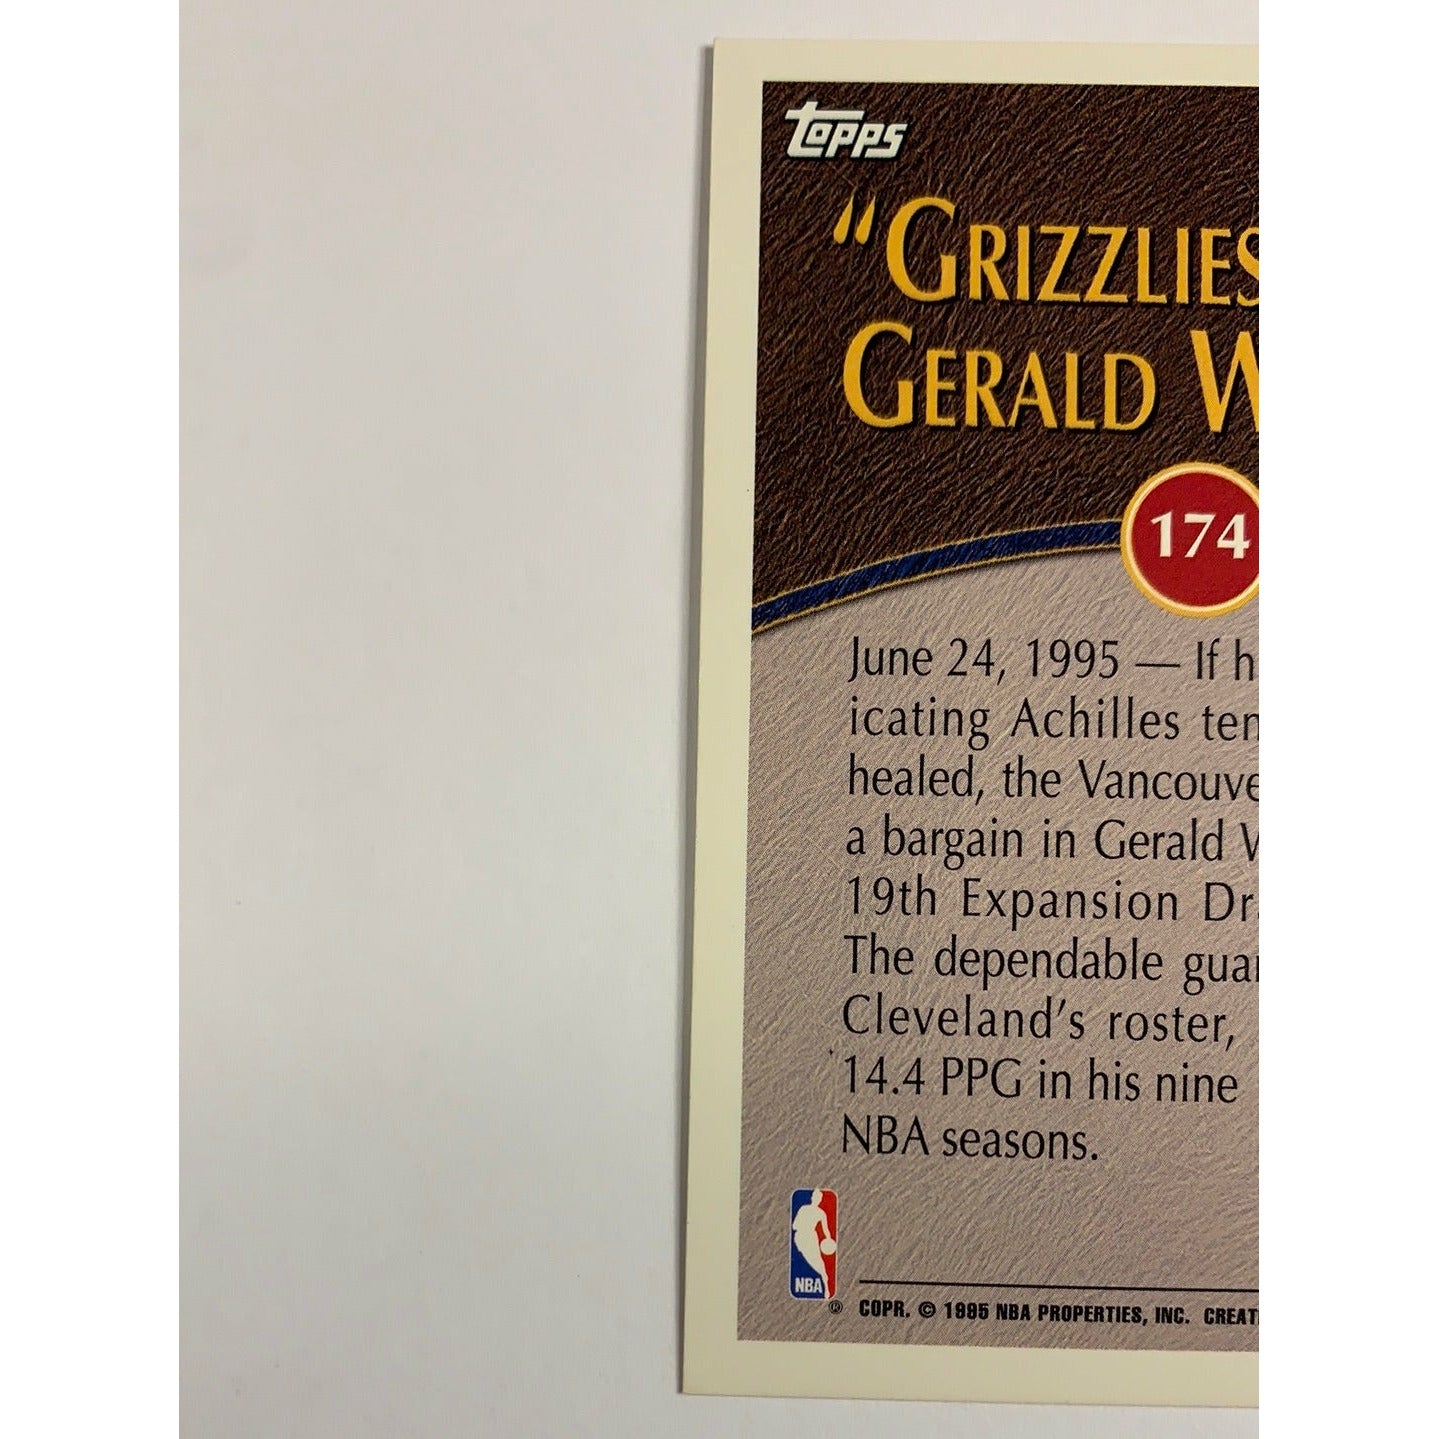 1995 Topps Grizzlies Draft Gerald Wilkins-Local Legends Cards & Collectibles